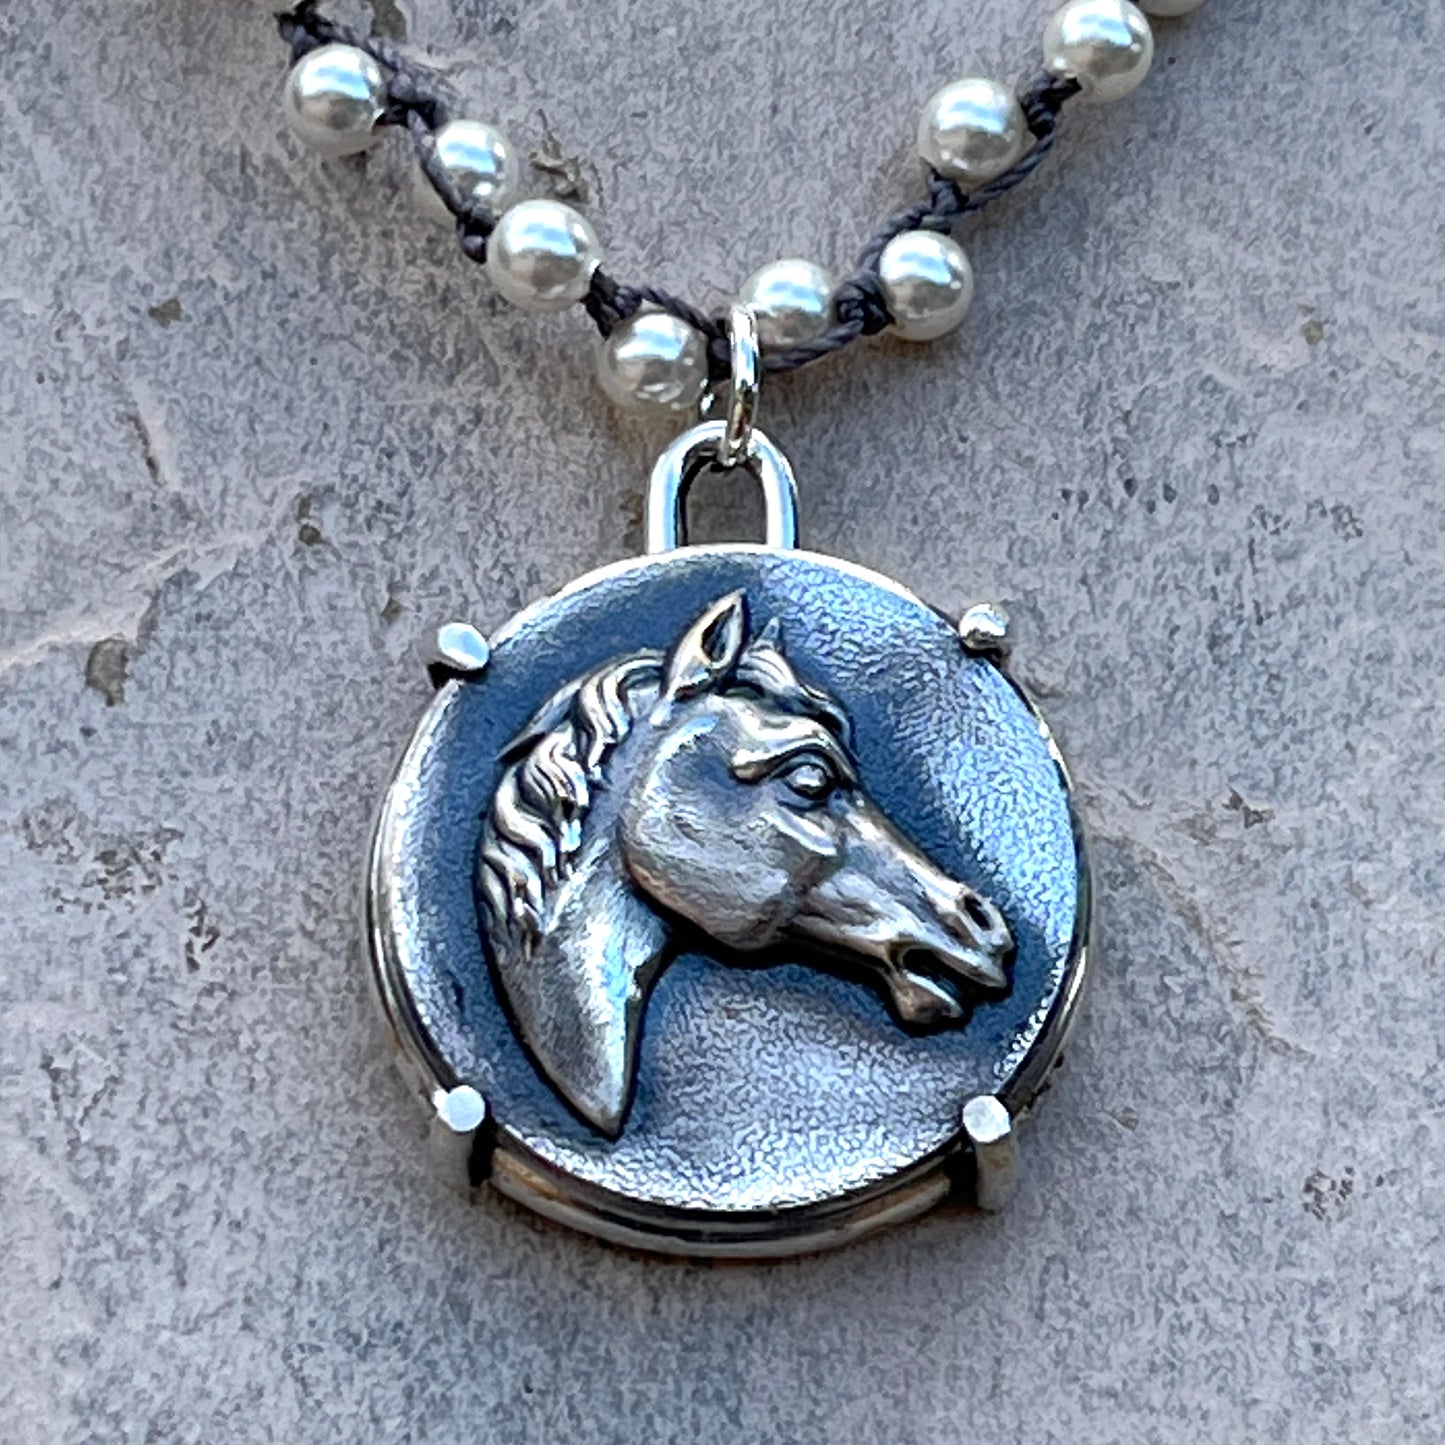 Vintage Silver-Plated  Horse Head Button on Pearl Necklace